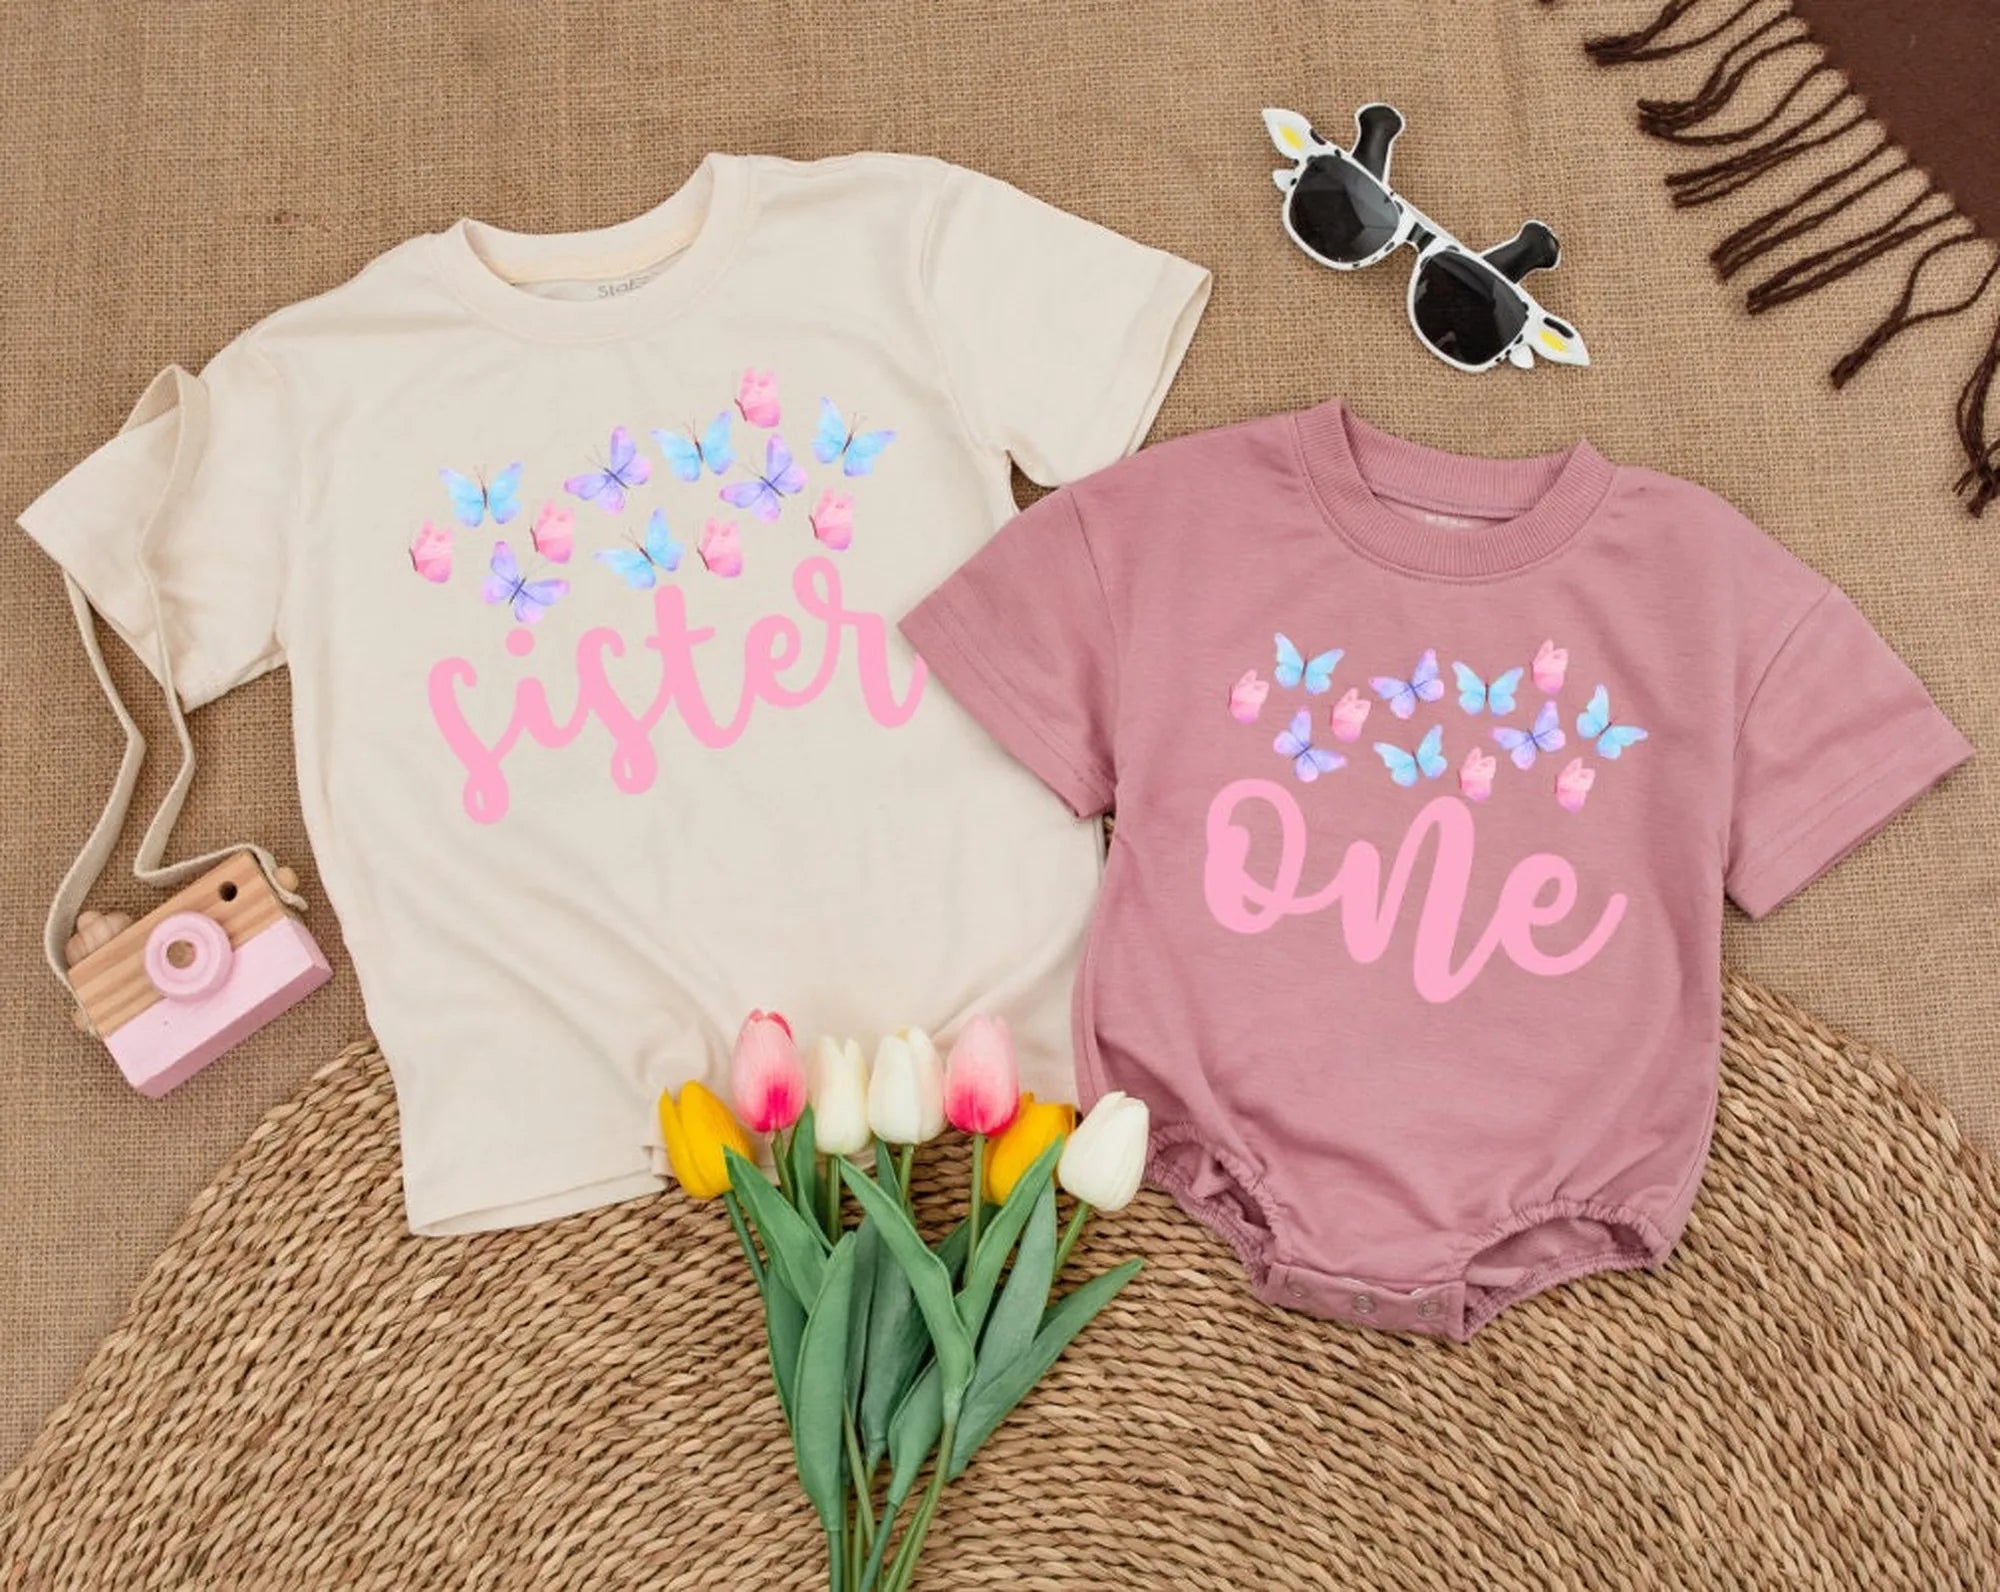 Butterfly Matching Family Birthday T-Shirt: Baby Romper Outfit!